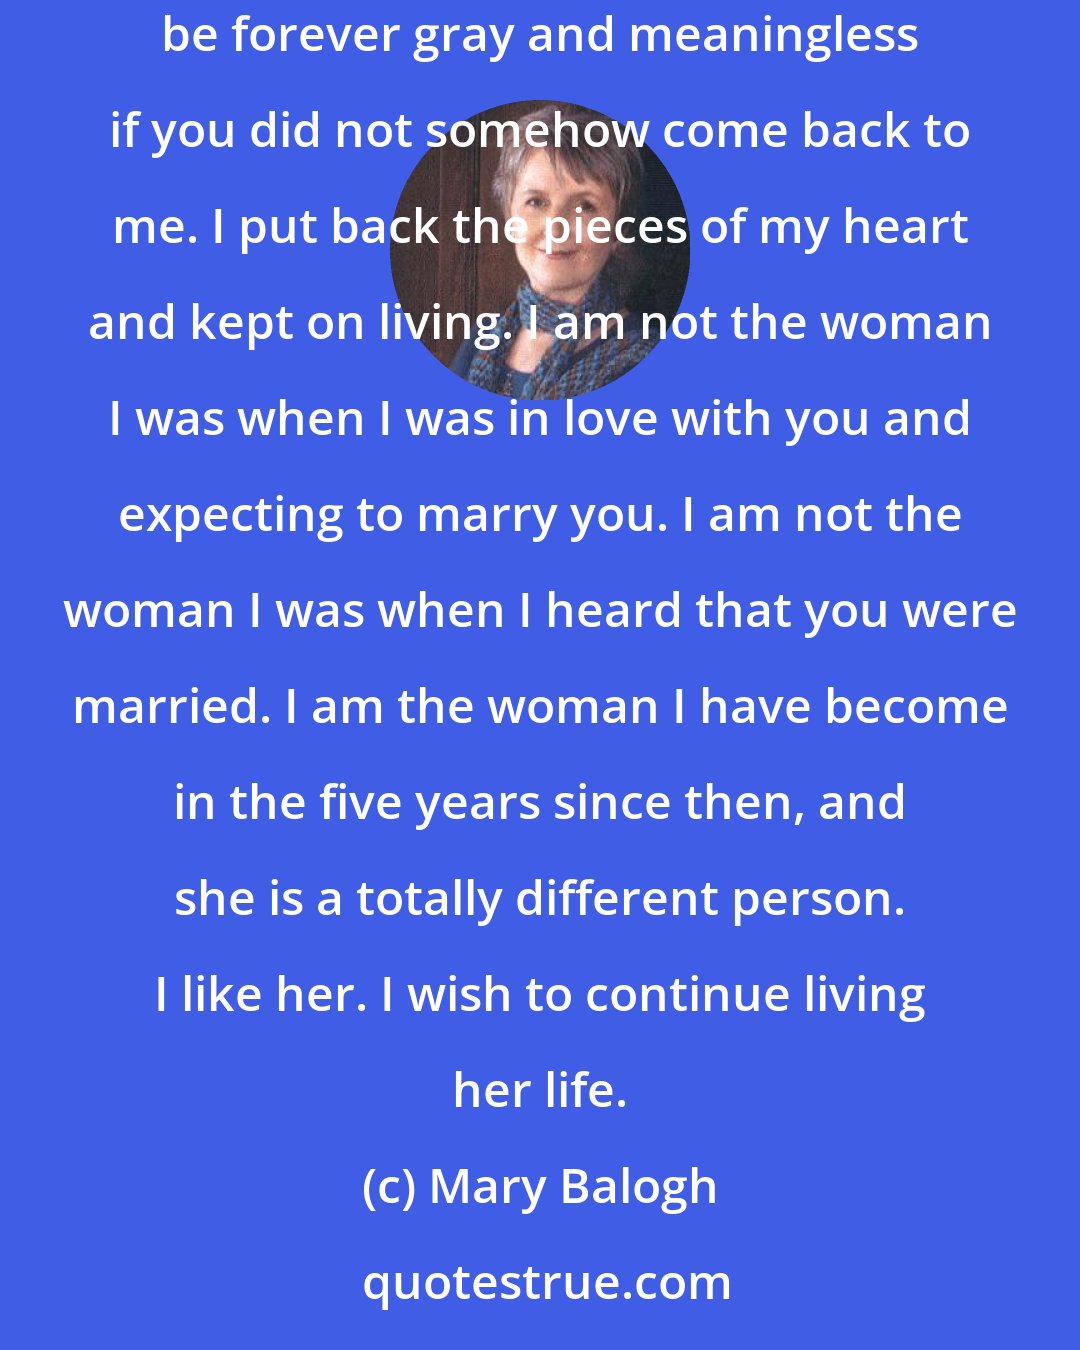 Mary Balogh: After you married, Crispin, she said, my heart was broken. I will not deny it. But I did not slip into a sort of suspended life that would be forever gray and meaningless if you did not somehow come back to me. I put back the pieces of my heart and kept on living. I am not the woman I was when I was in love with you and expecting to marry you. I am not the woman I was when I heard that you were married. I am the woman I have become in the five years since then, and she is a totally different person. I like her. I wish to continue living her life.